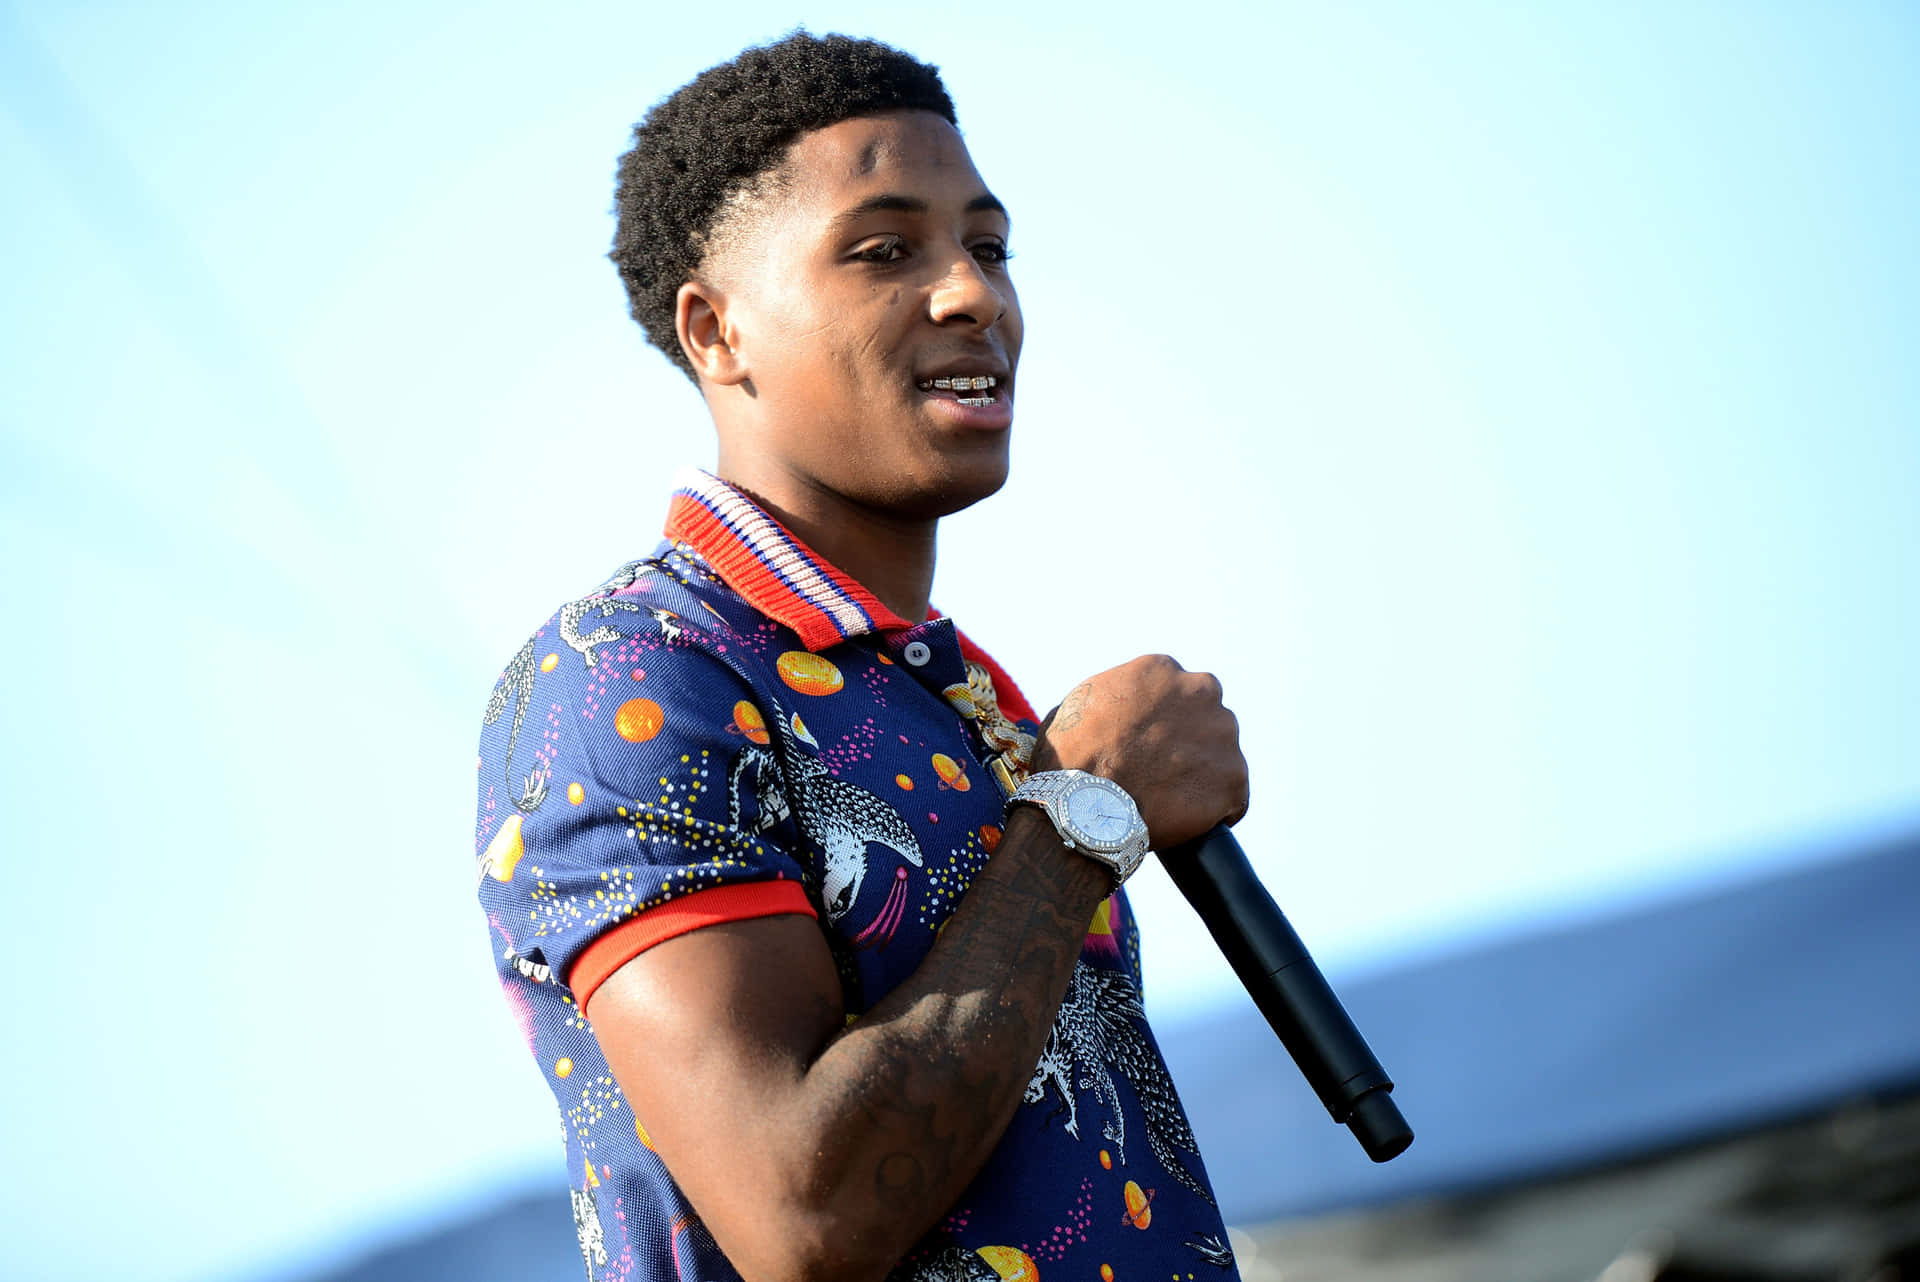 Image  Youngboy stands confidently in the spotlight